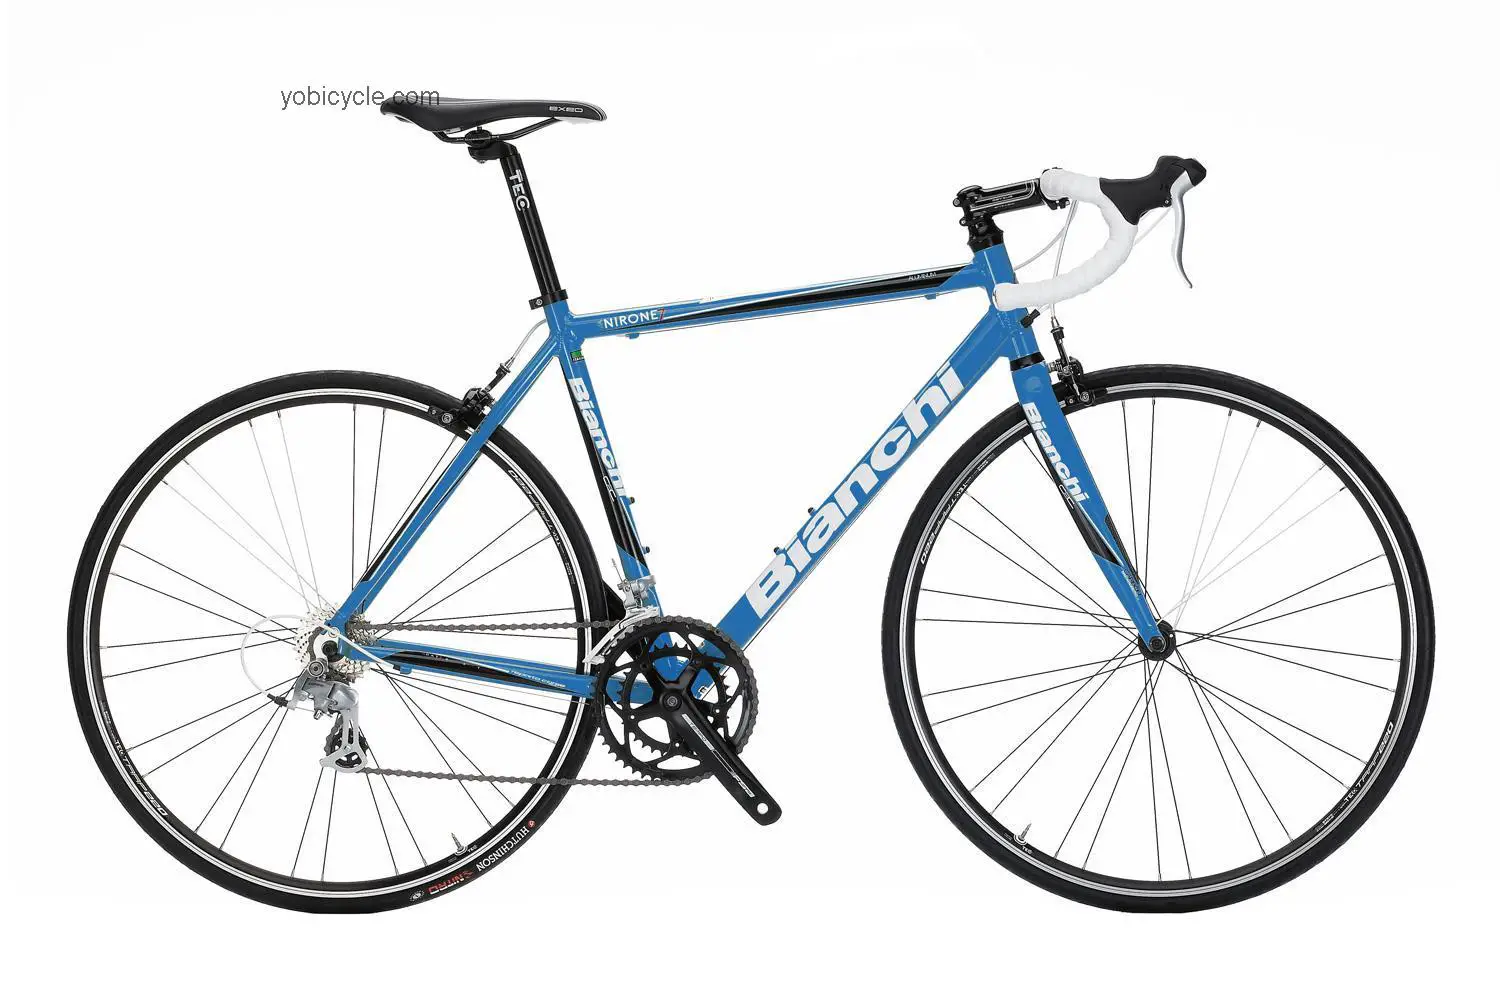 Bianchi  Via Nirone 7 2300 Technical data and specifications